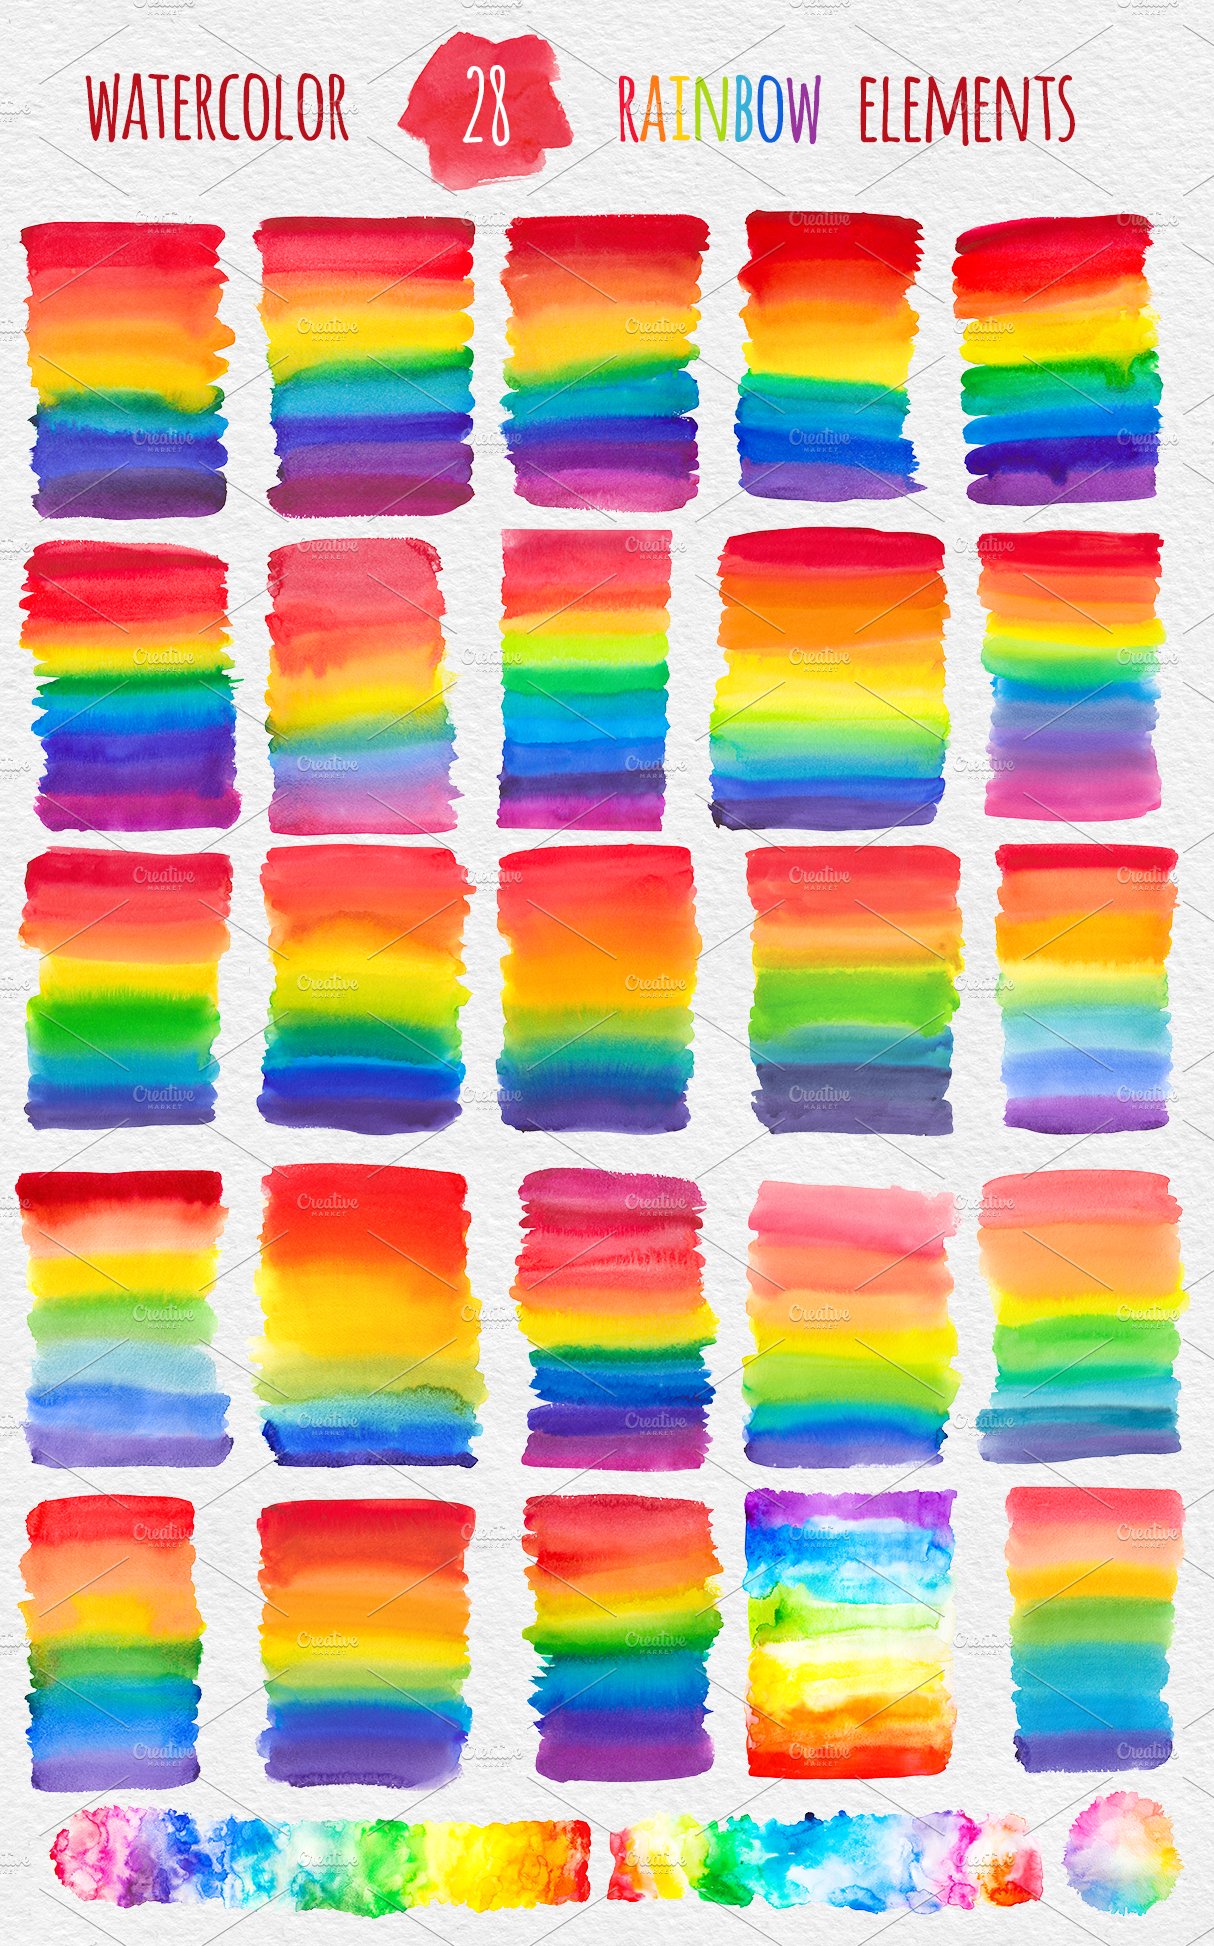 Rainbow watercolor texture set preview image.